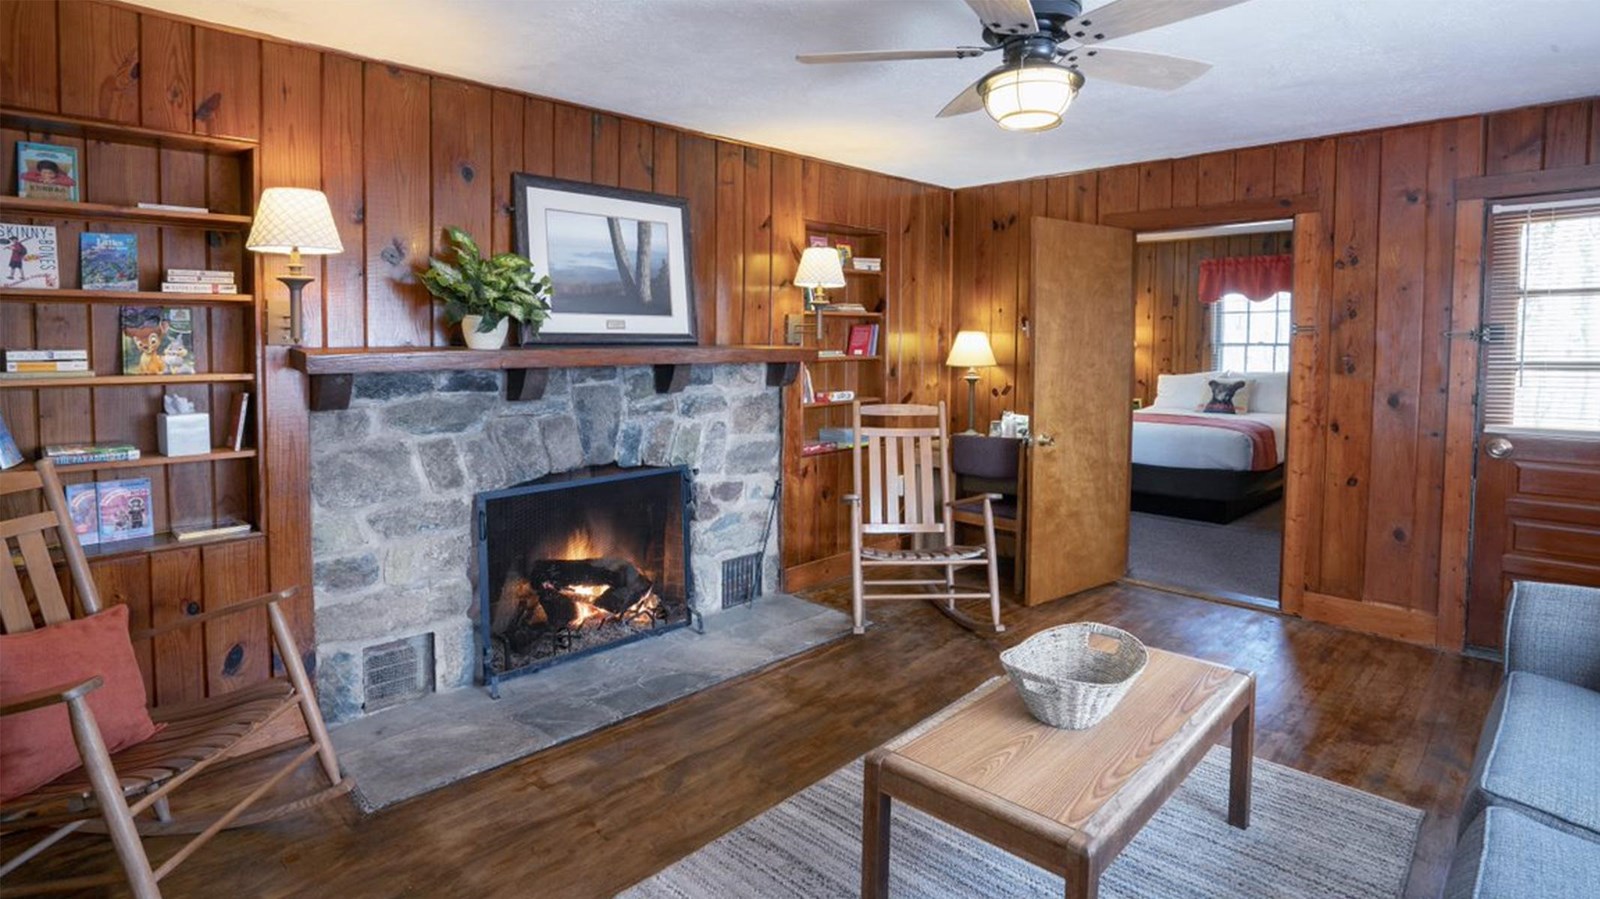 The interior of a lodge with wood walls and a stone fireplace.